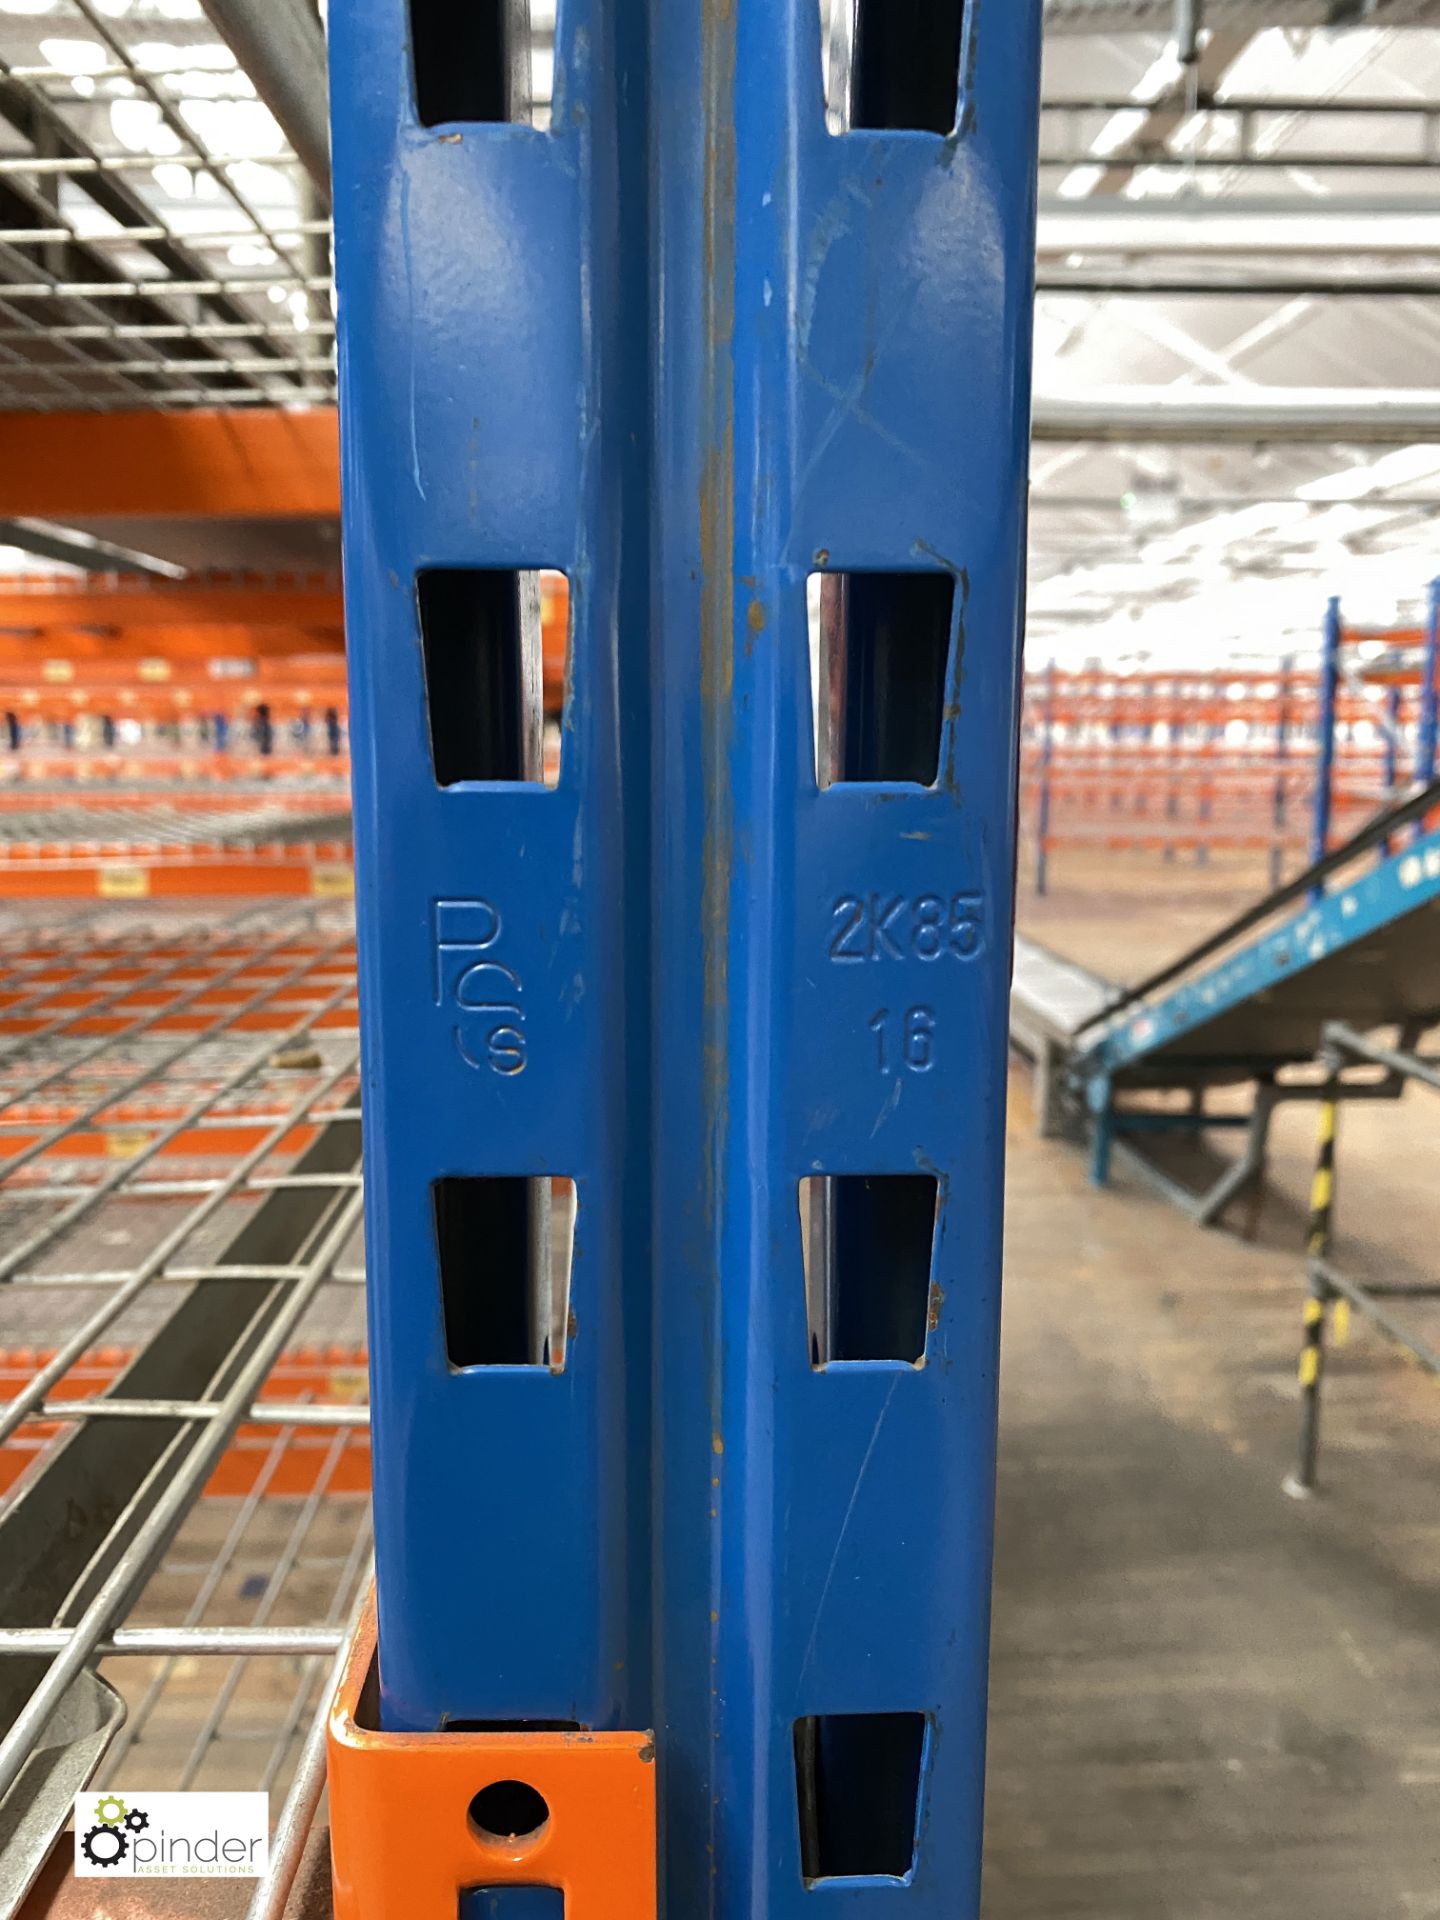 7 bays PSS 2K85 16 boltless Stock Racking, comprising 8 uprights 2400mm x 1200mm, 56 beams 2700mm, - Image 5 of 5